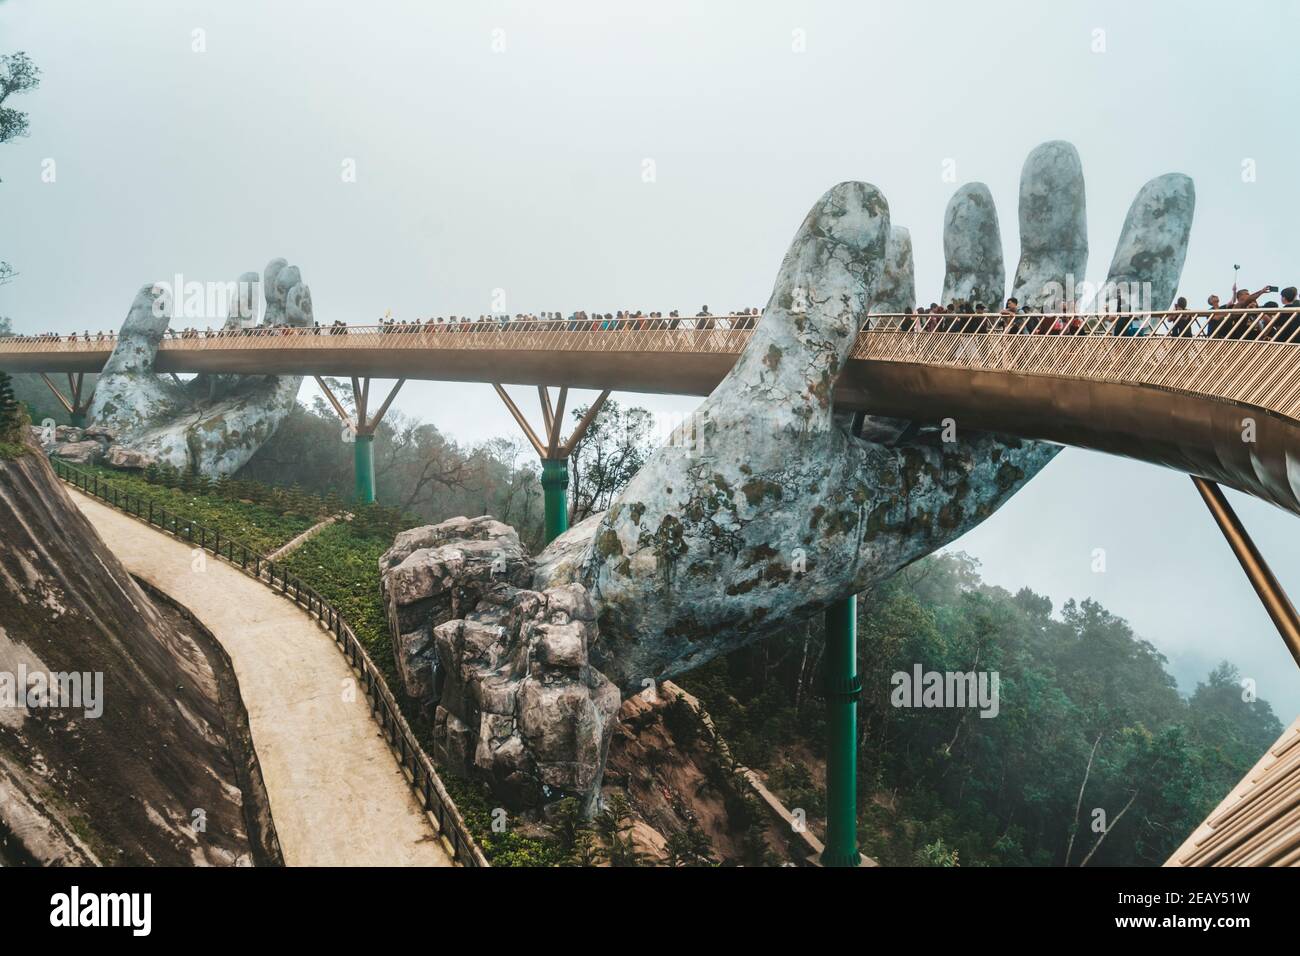 Ba Na Hill mountain resort, Danang city, Vietnam - JANUARY 07, 2019: The Golden Bridge is lifted by two giant hands in the tourist resort on Ba Na Hil Stock Photo